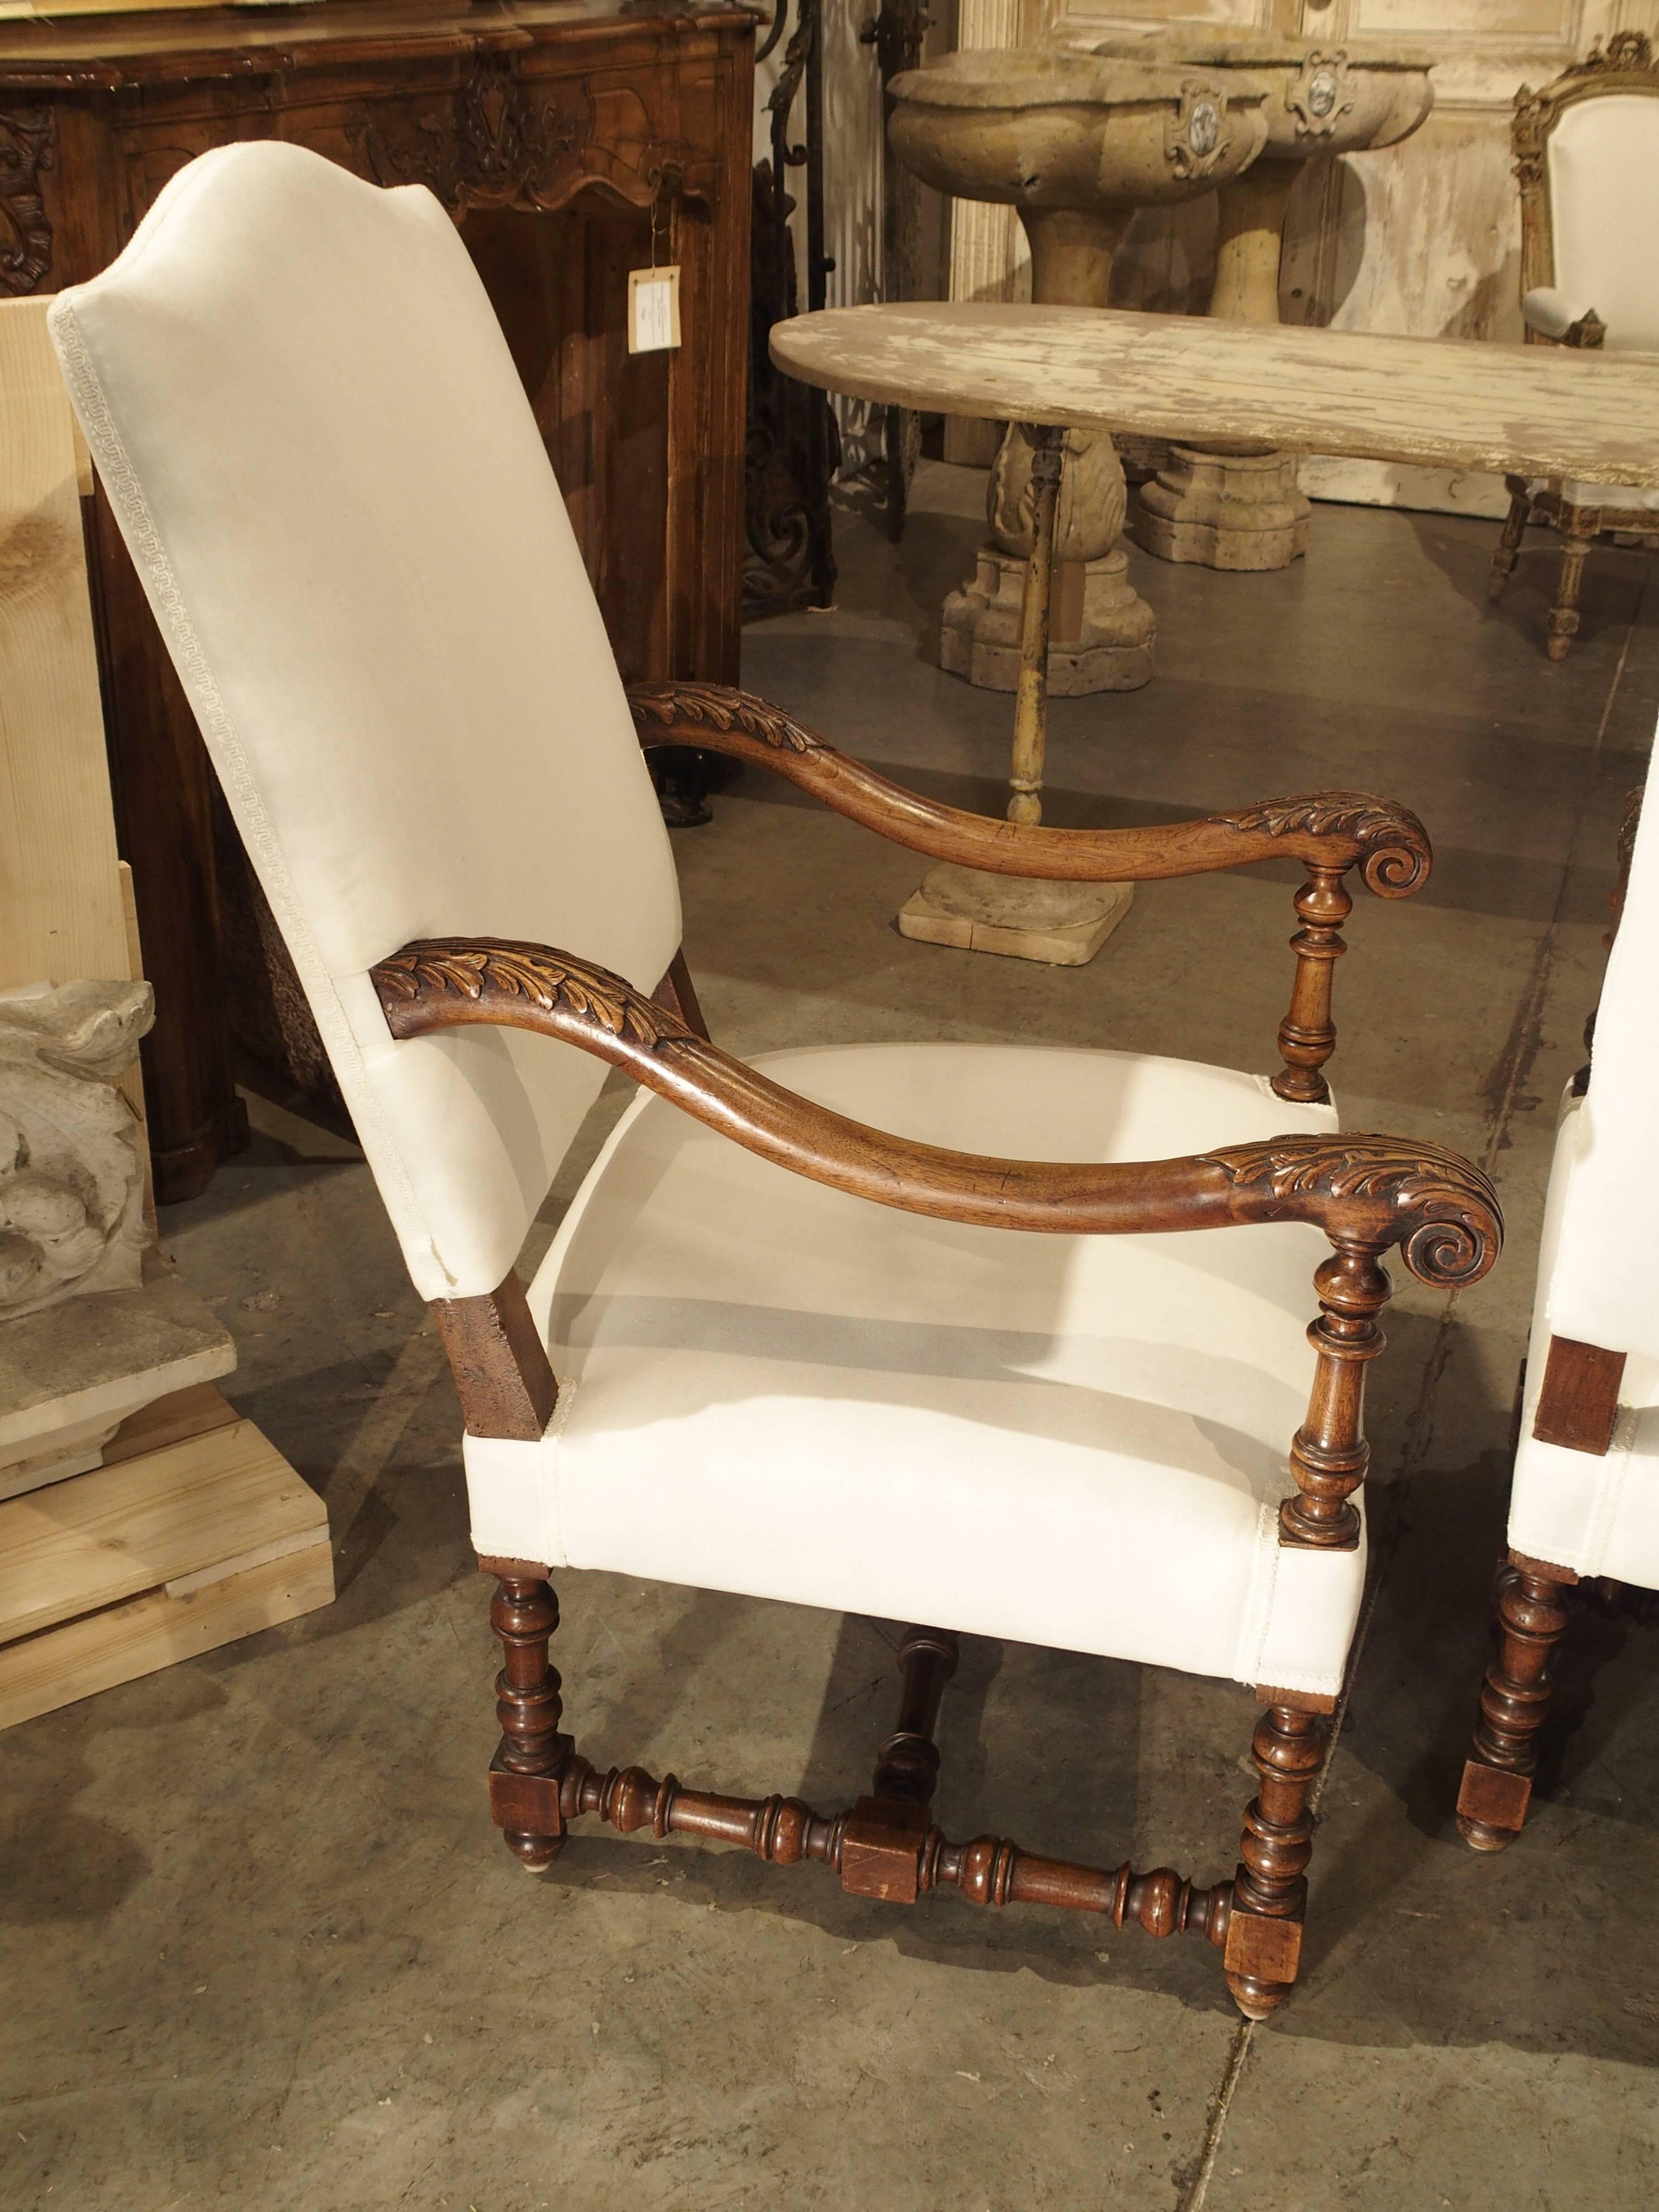 This wonderful pair of antique French, walnut wood armchairs has been covered in muslin with gimp trim. The arms are carved with acanthus leaf motifs with baluster terminals. The terminals line up with the legs which are baluster turned and the